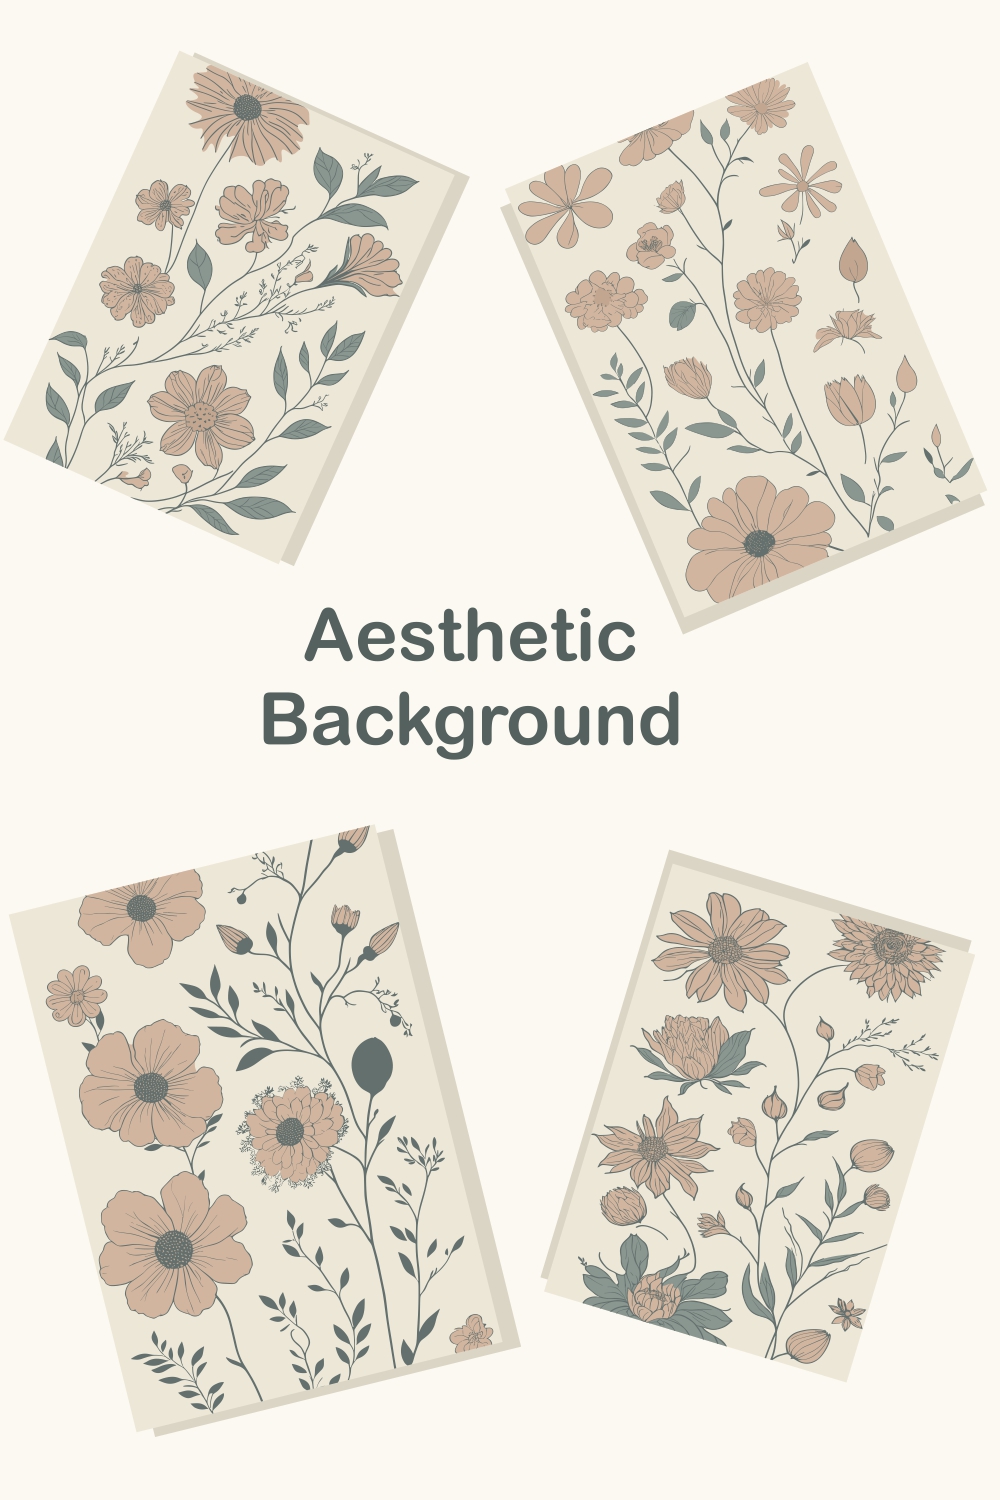 Aesthetic background - only $5 pinterest preview image.